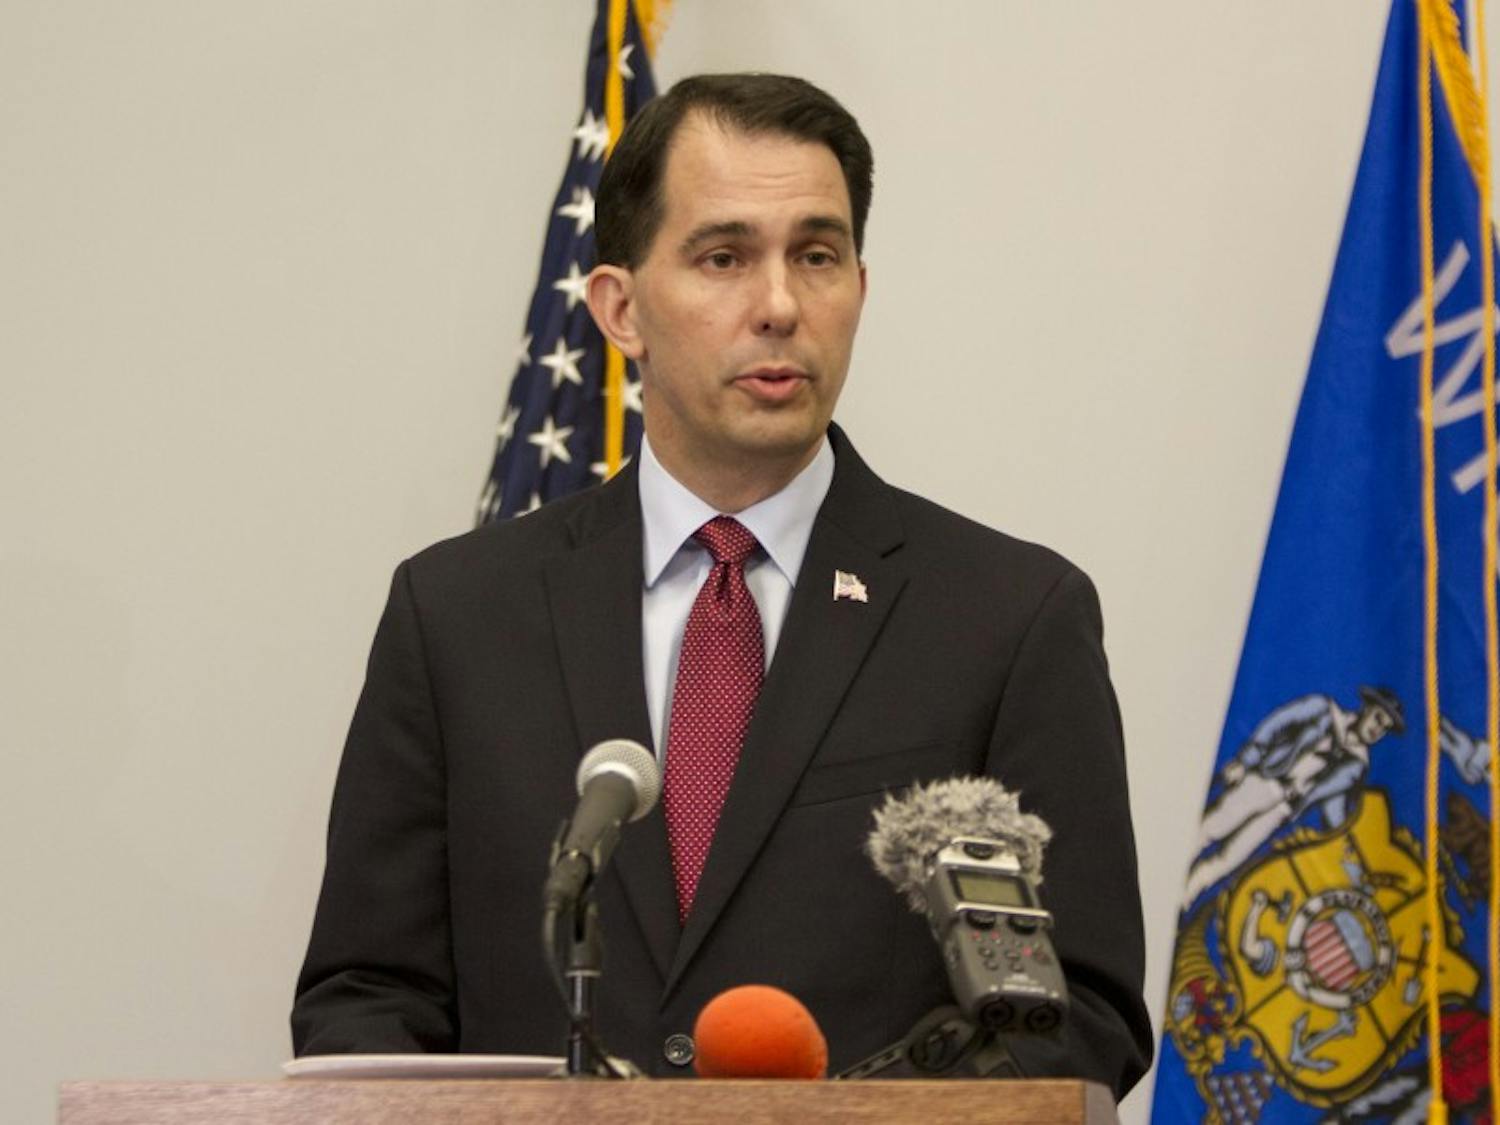 As the system struggles under the weight of a dramatic increase in children entering foster care, Gov. Scott Walker signed into law key pieces of the state’s “Foster Forward” plan.